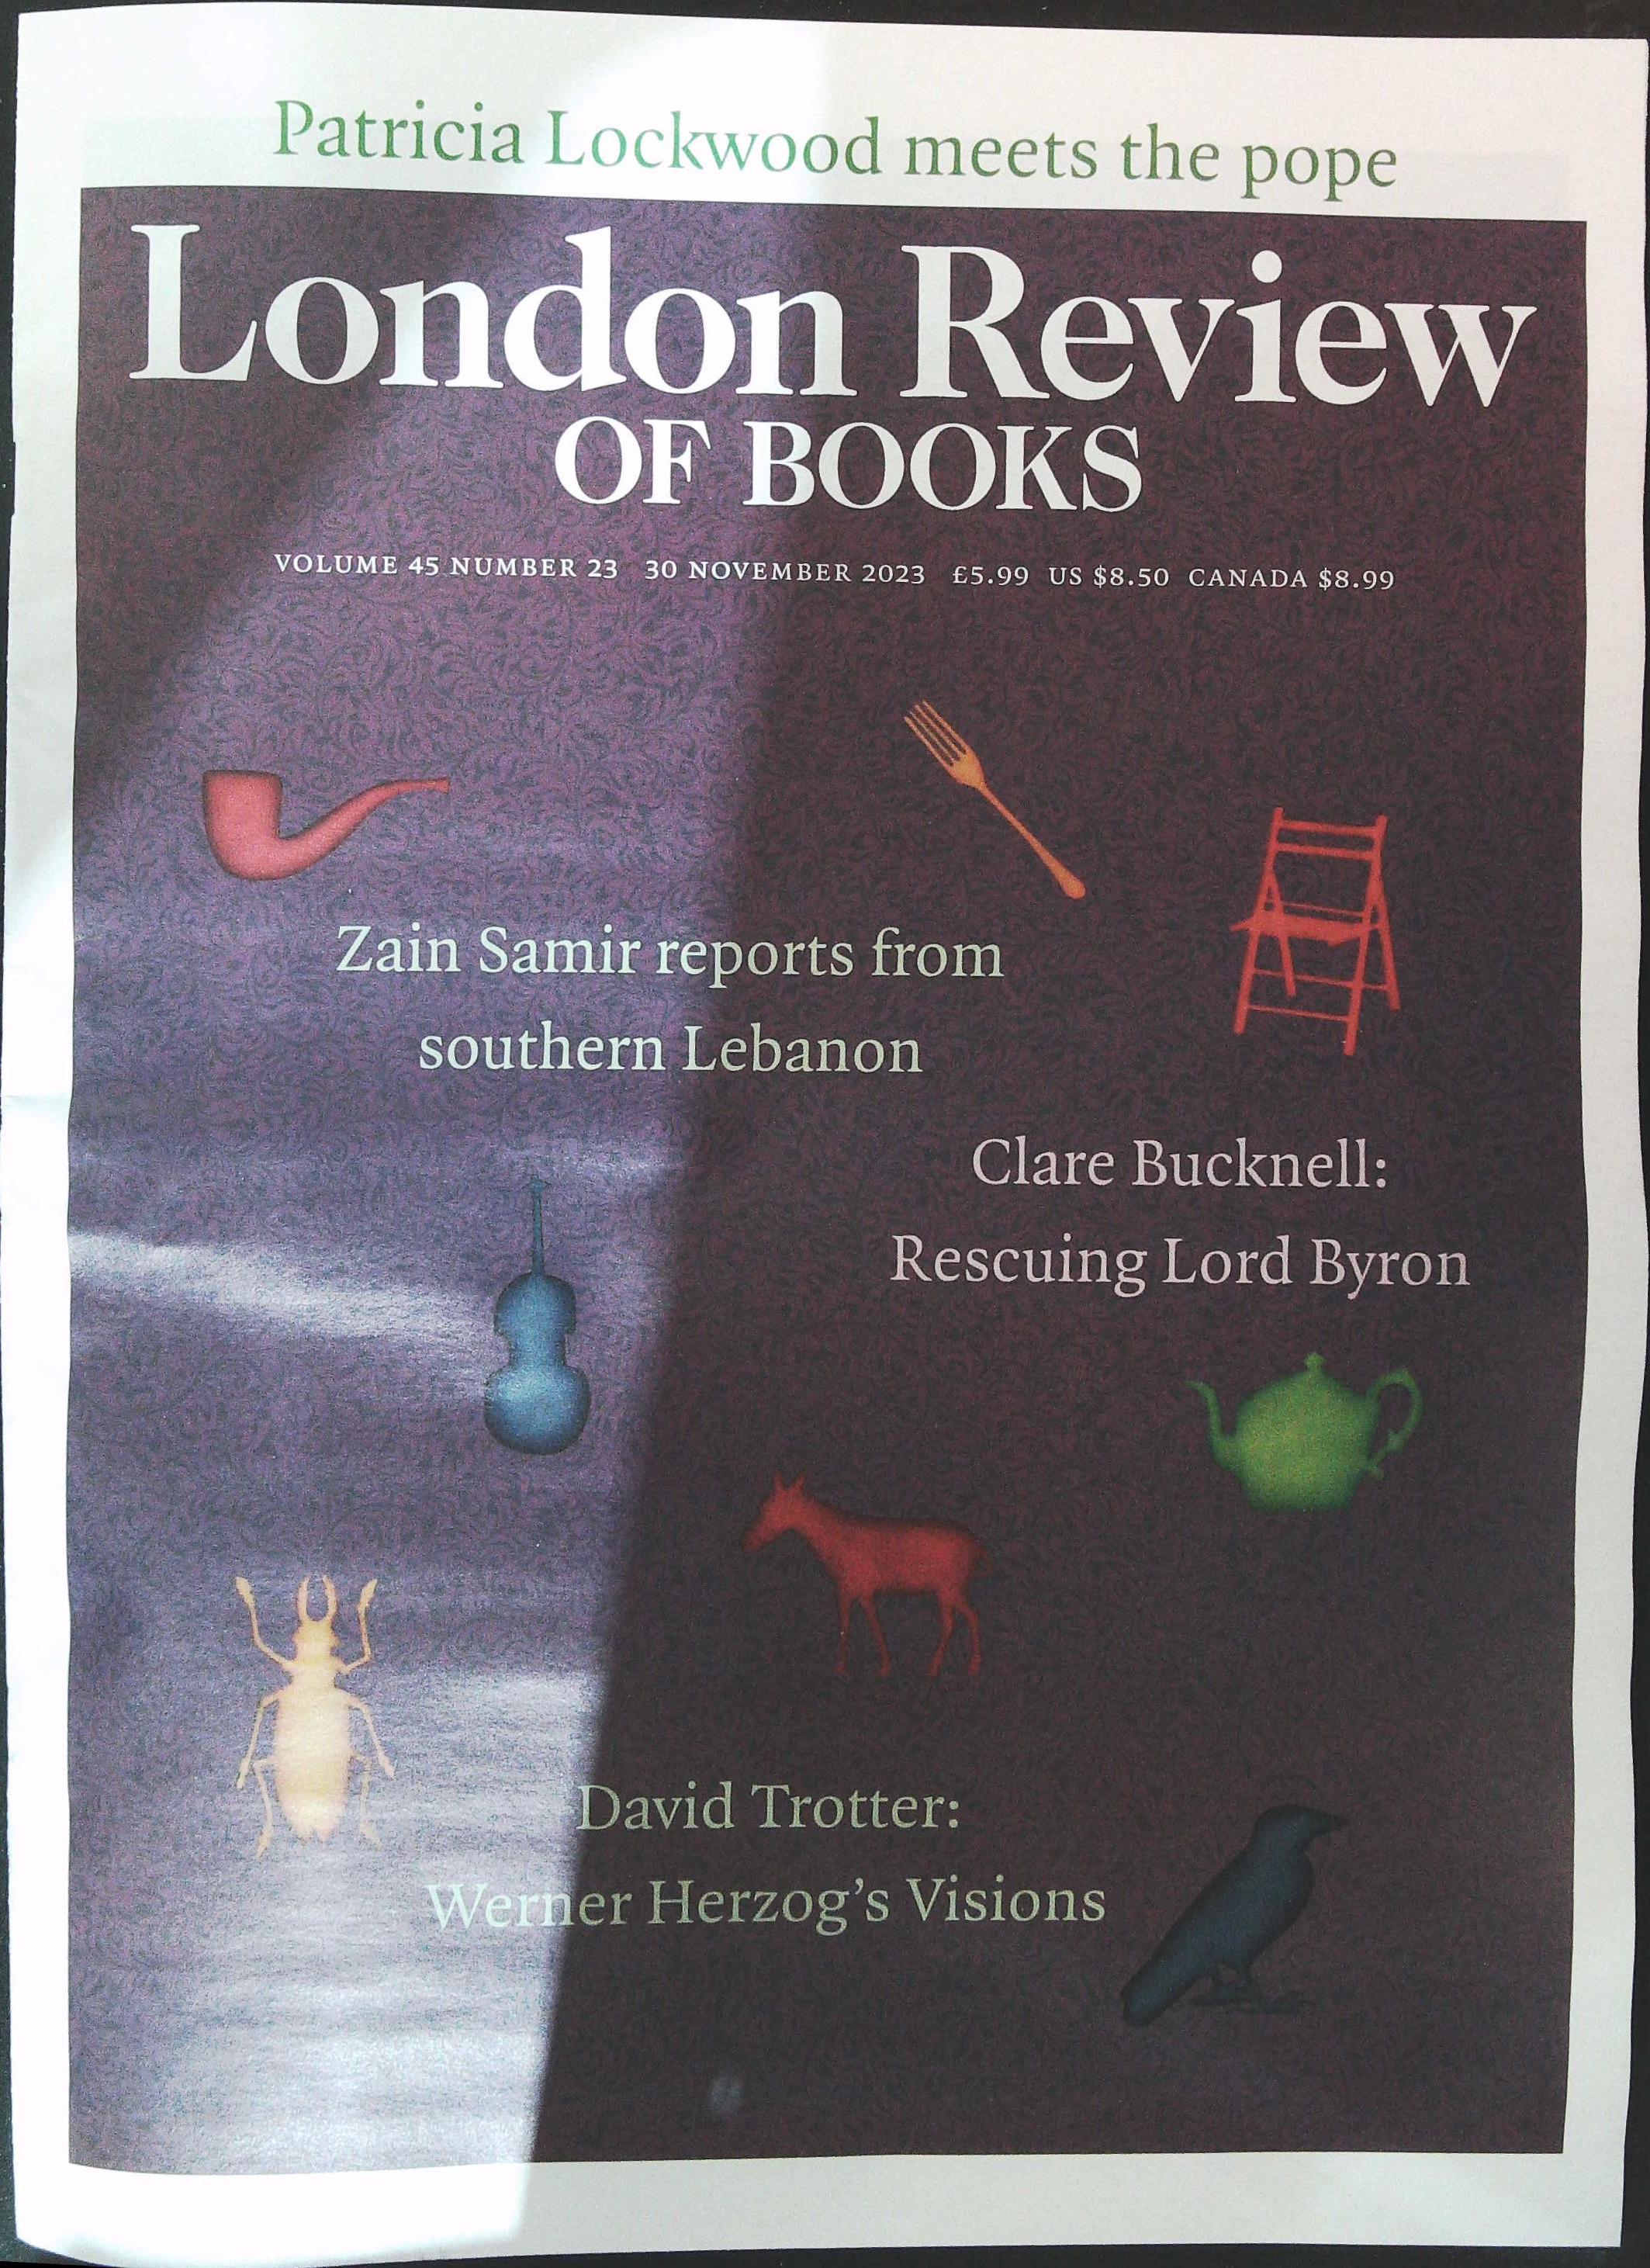 LONDON REVIEW OF BOOKS